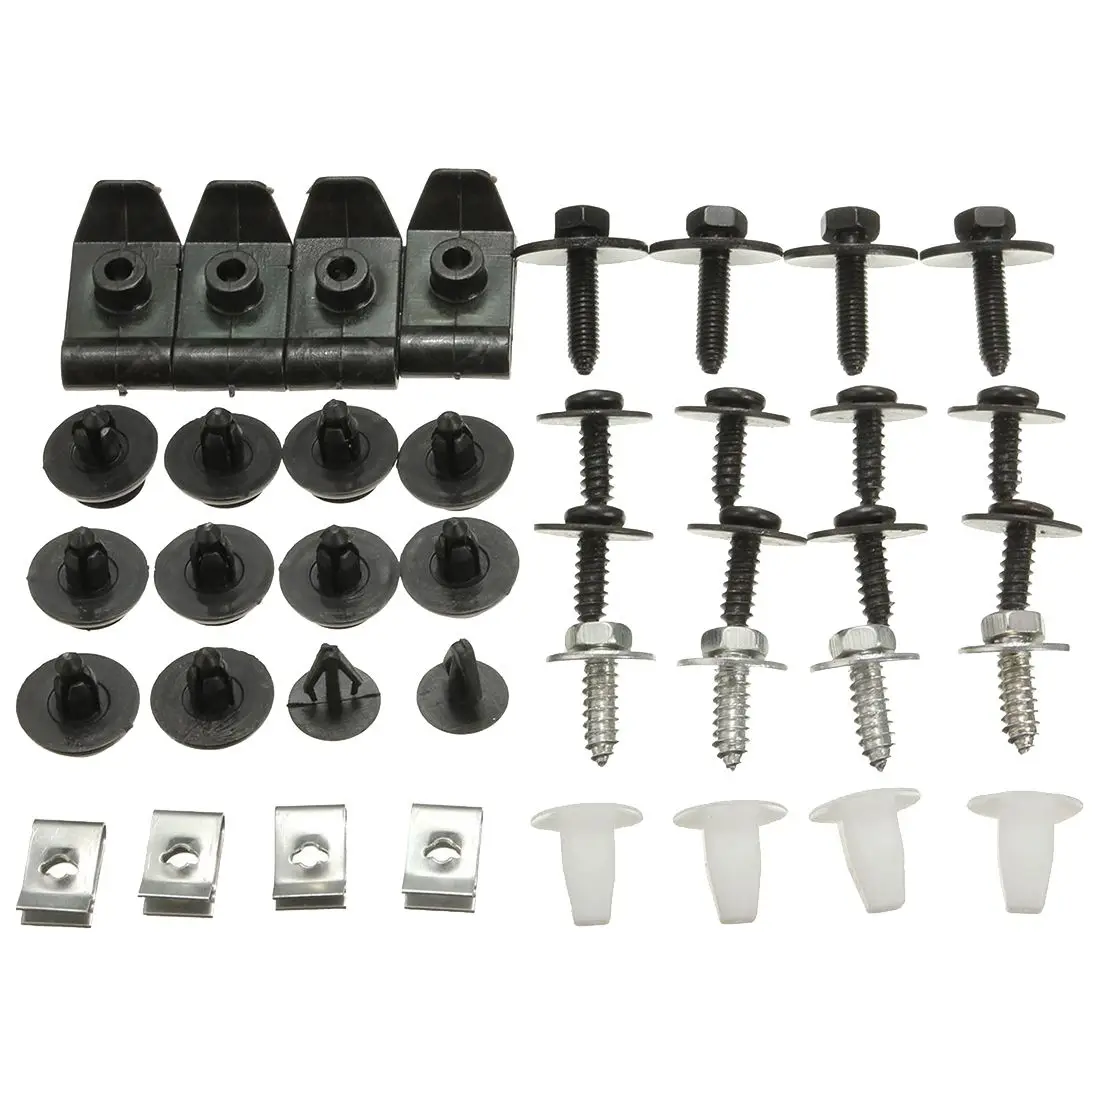 Car Engine Undertray Cover Clips Set of 40 Bottom Shield Guard Screws Fastener